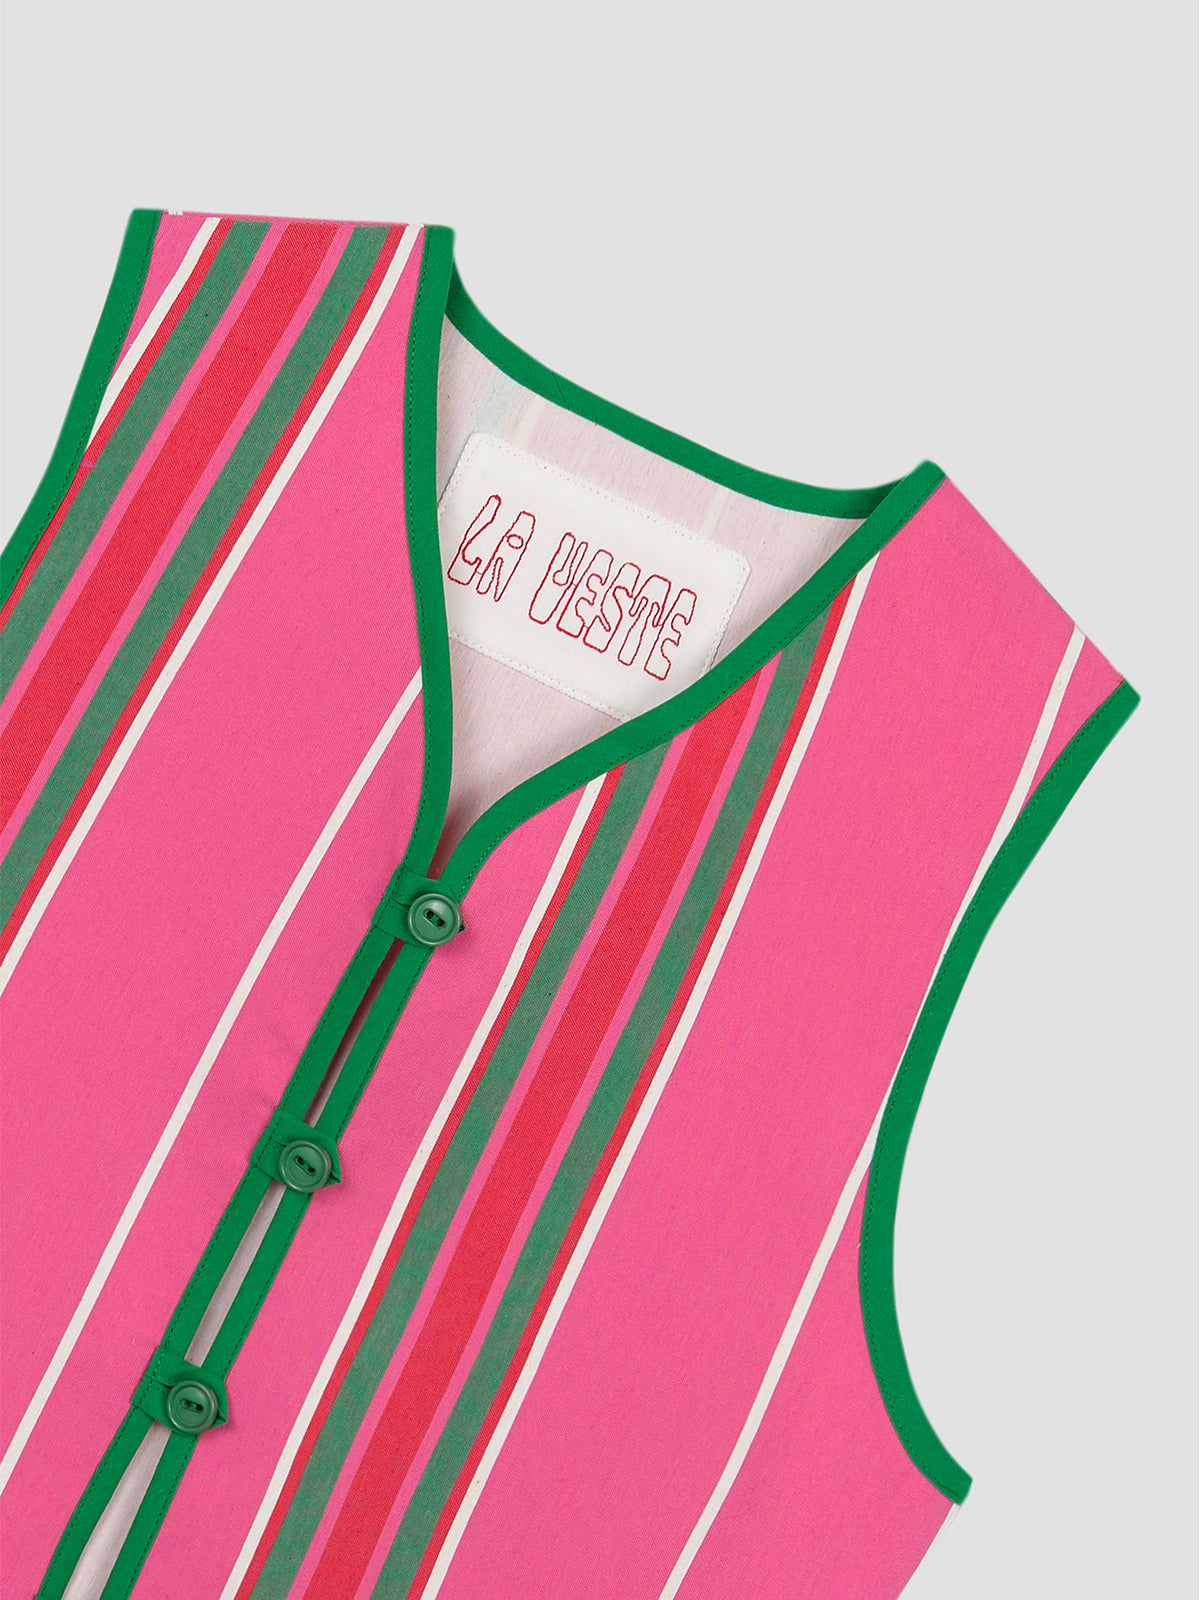 Fucshia cotton waistcoat with red and green stripes and green bias binding